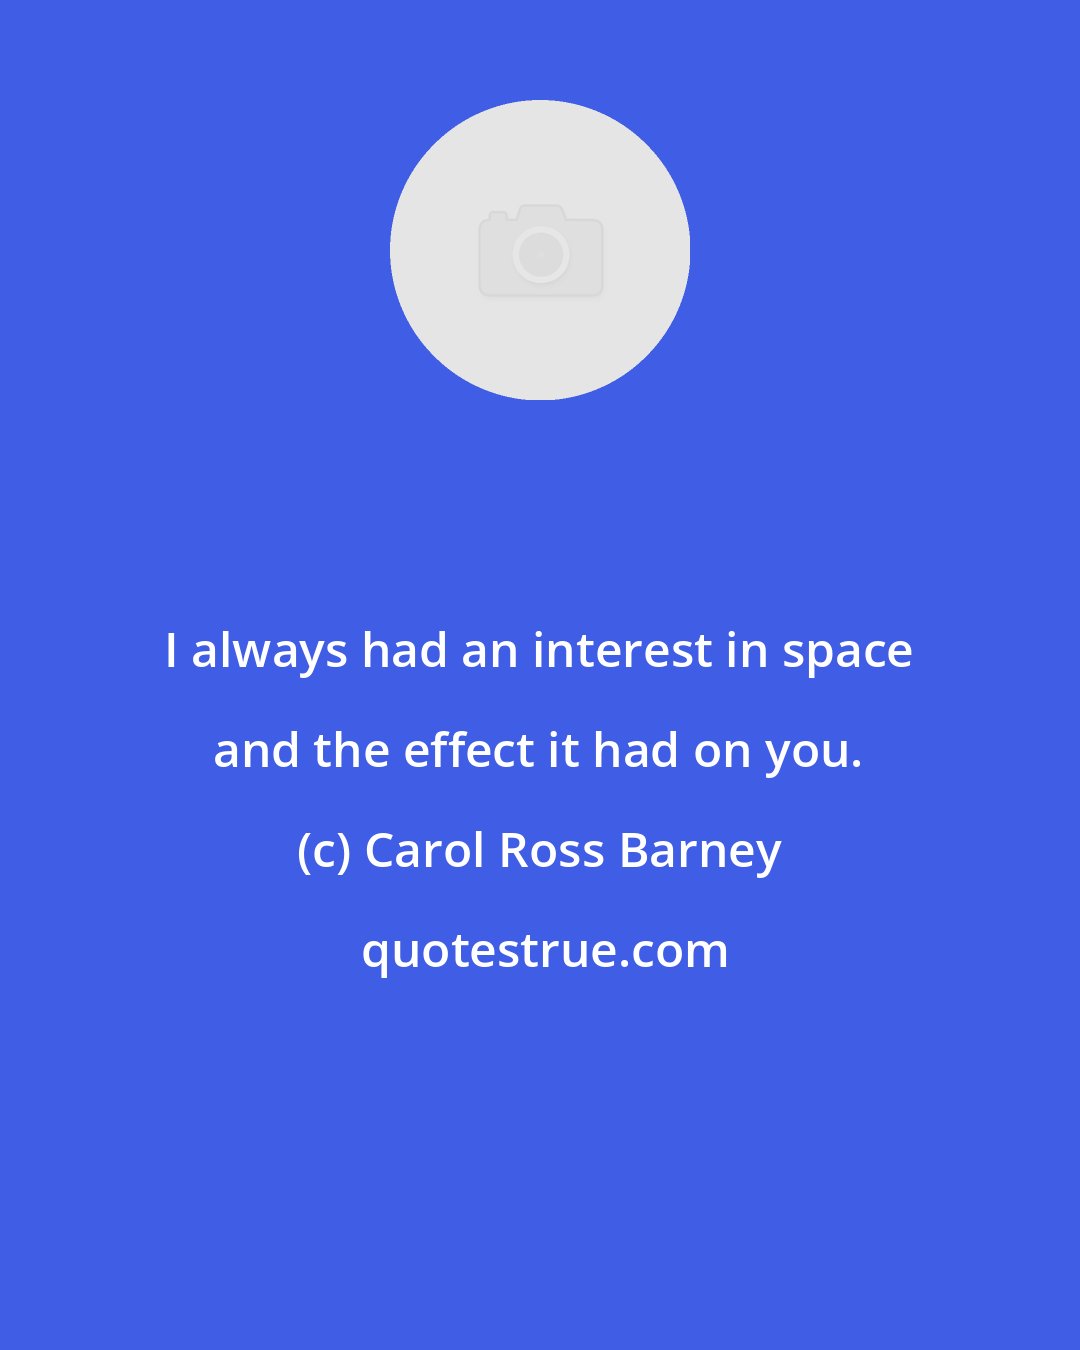 Carol Ross Barney: I always had an interest in space and the effect it had on you.